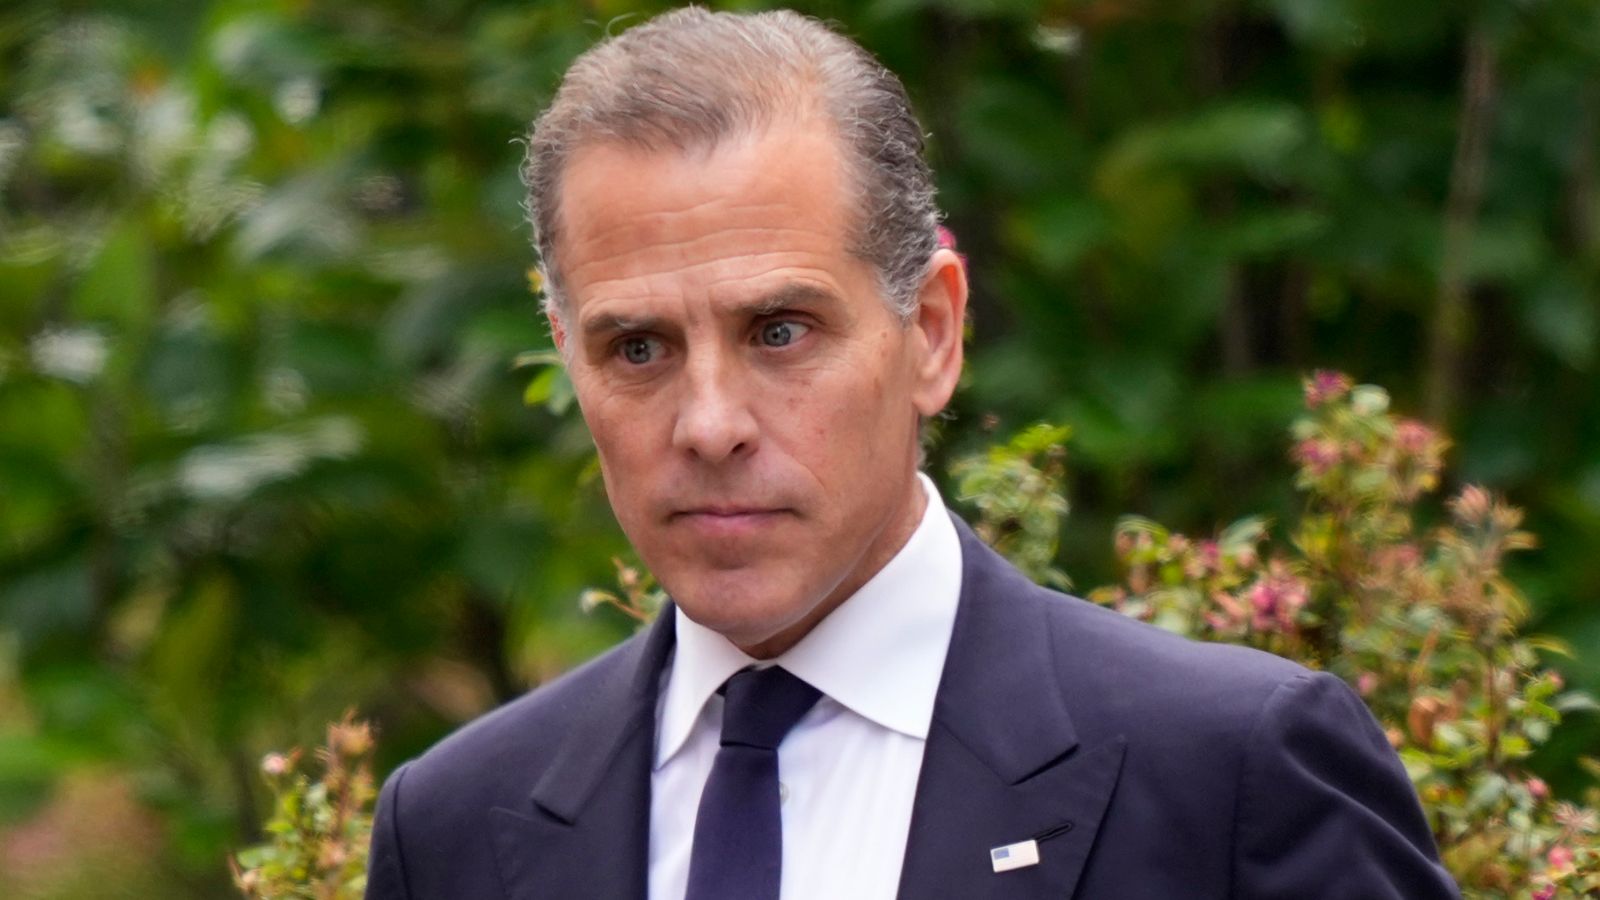 Hunter Biden is first sitting US president's son to be convicted of crime